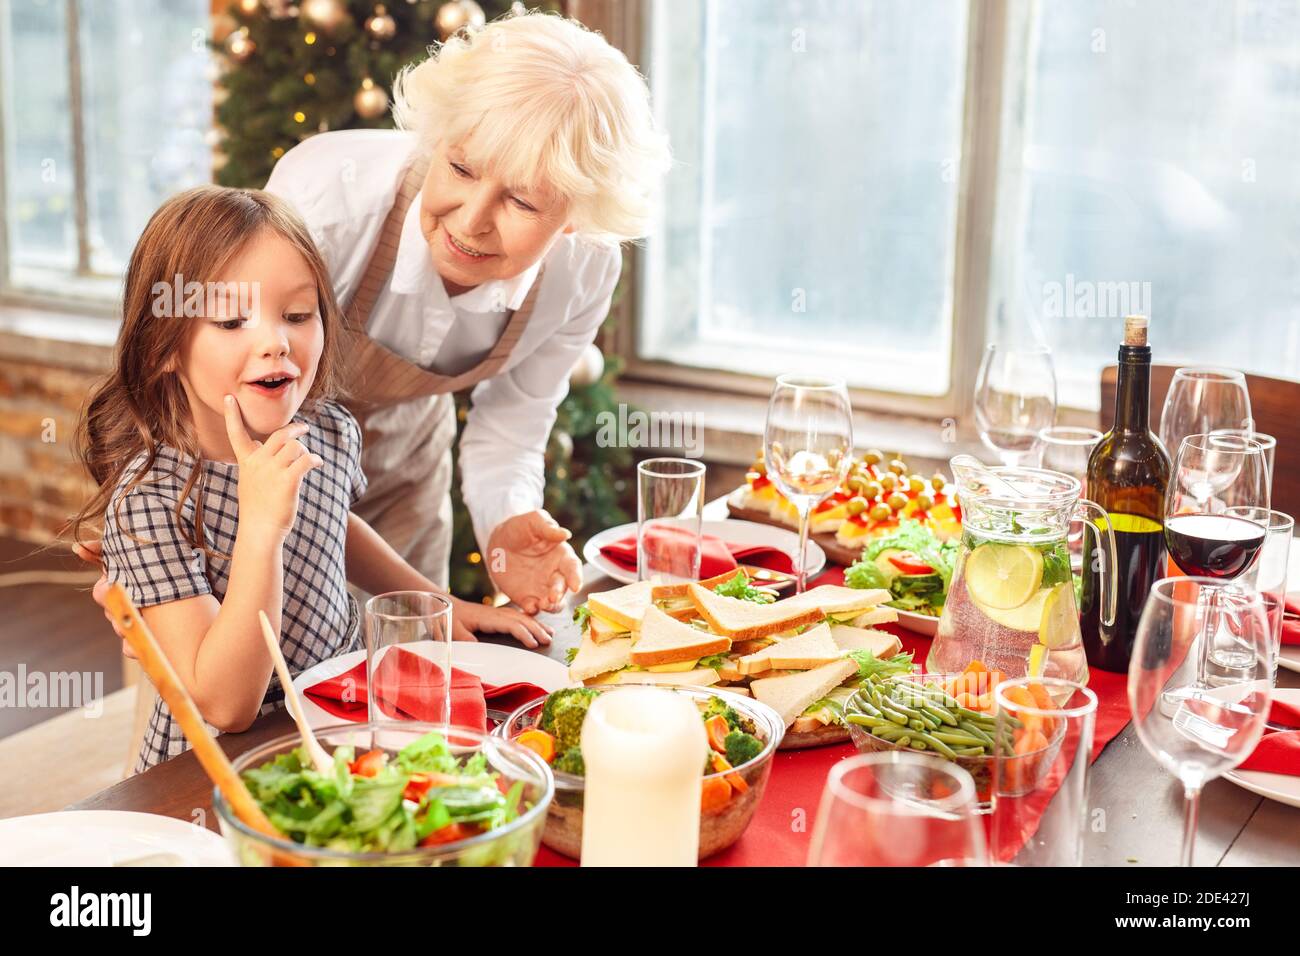 Hungry little girl looking at served dinner table Stock Photo